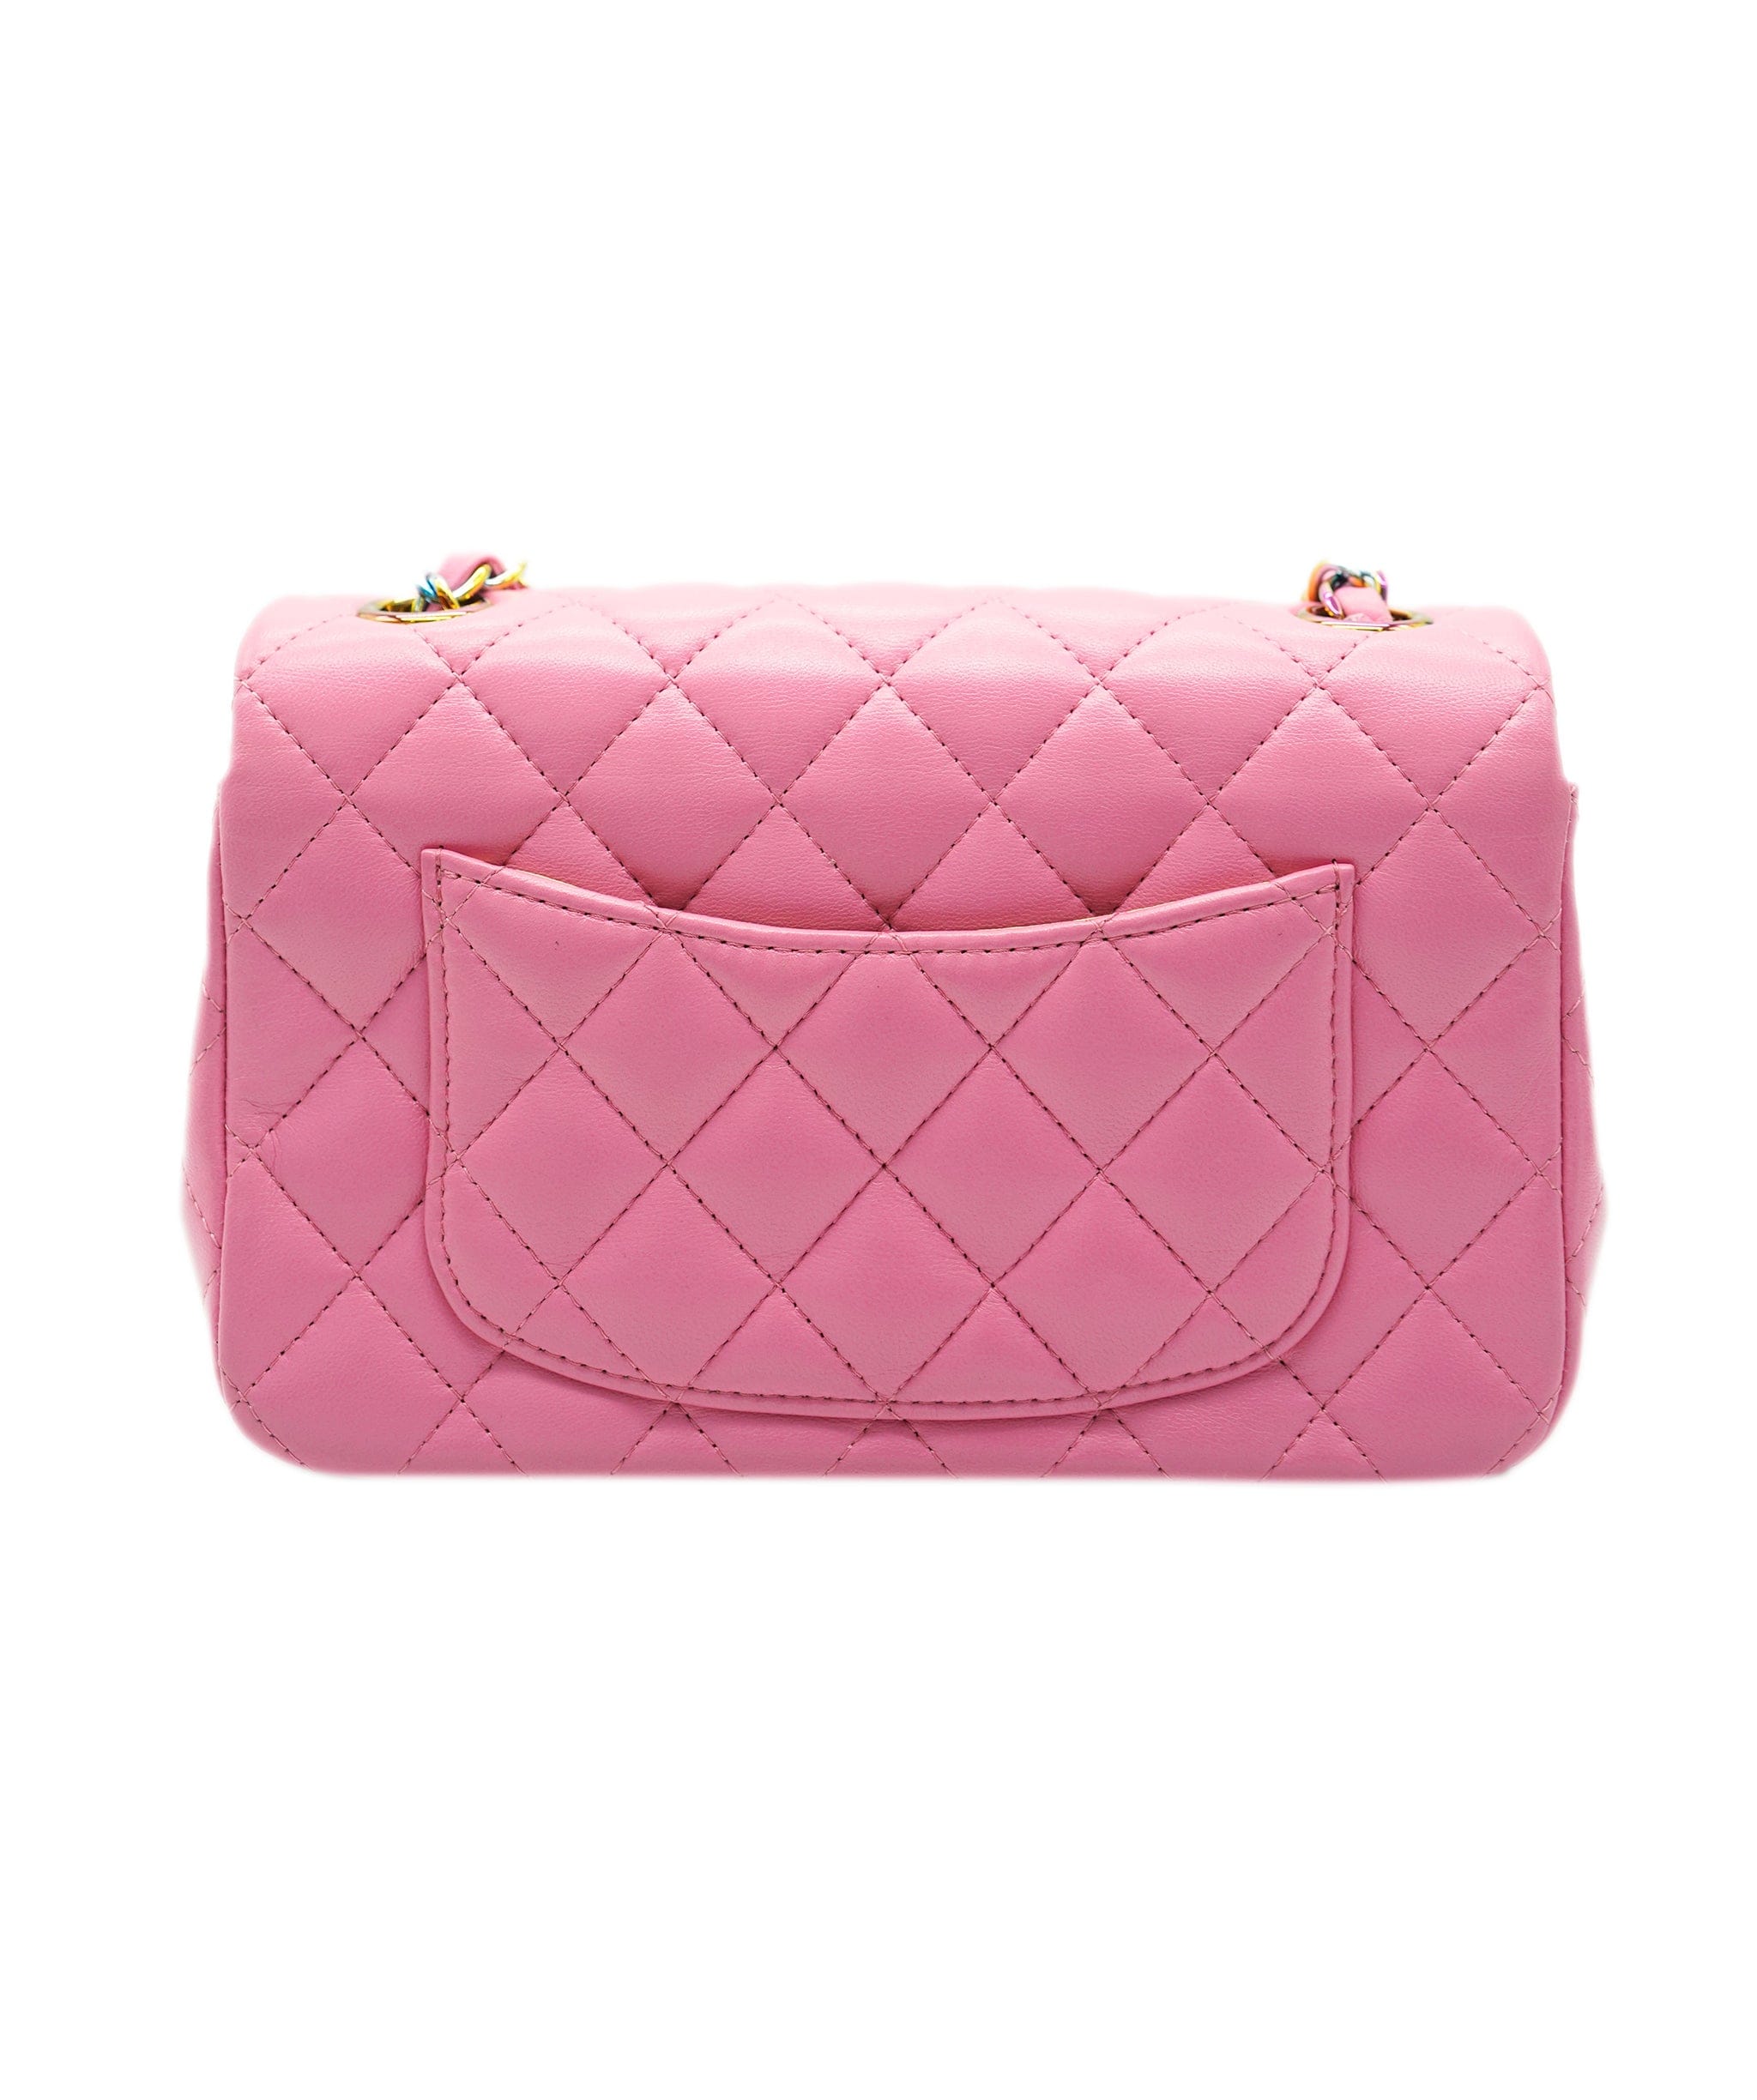 Chanel Chanel mini rectangle pink classic bag w/ iridescent clasp AVC1956